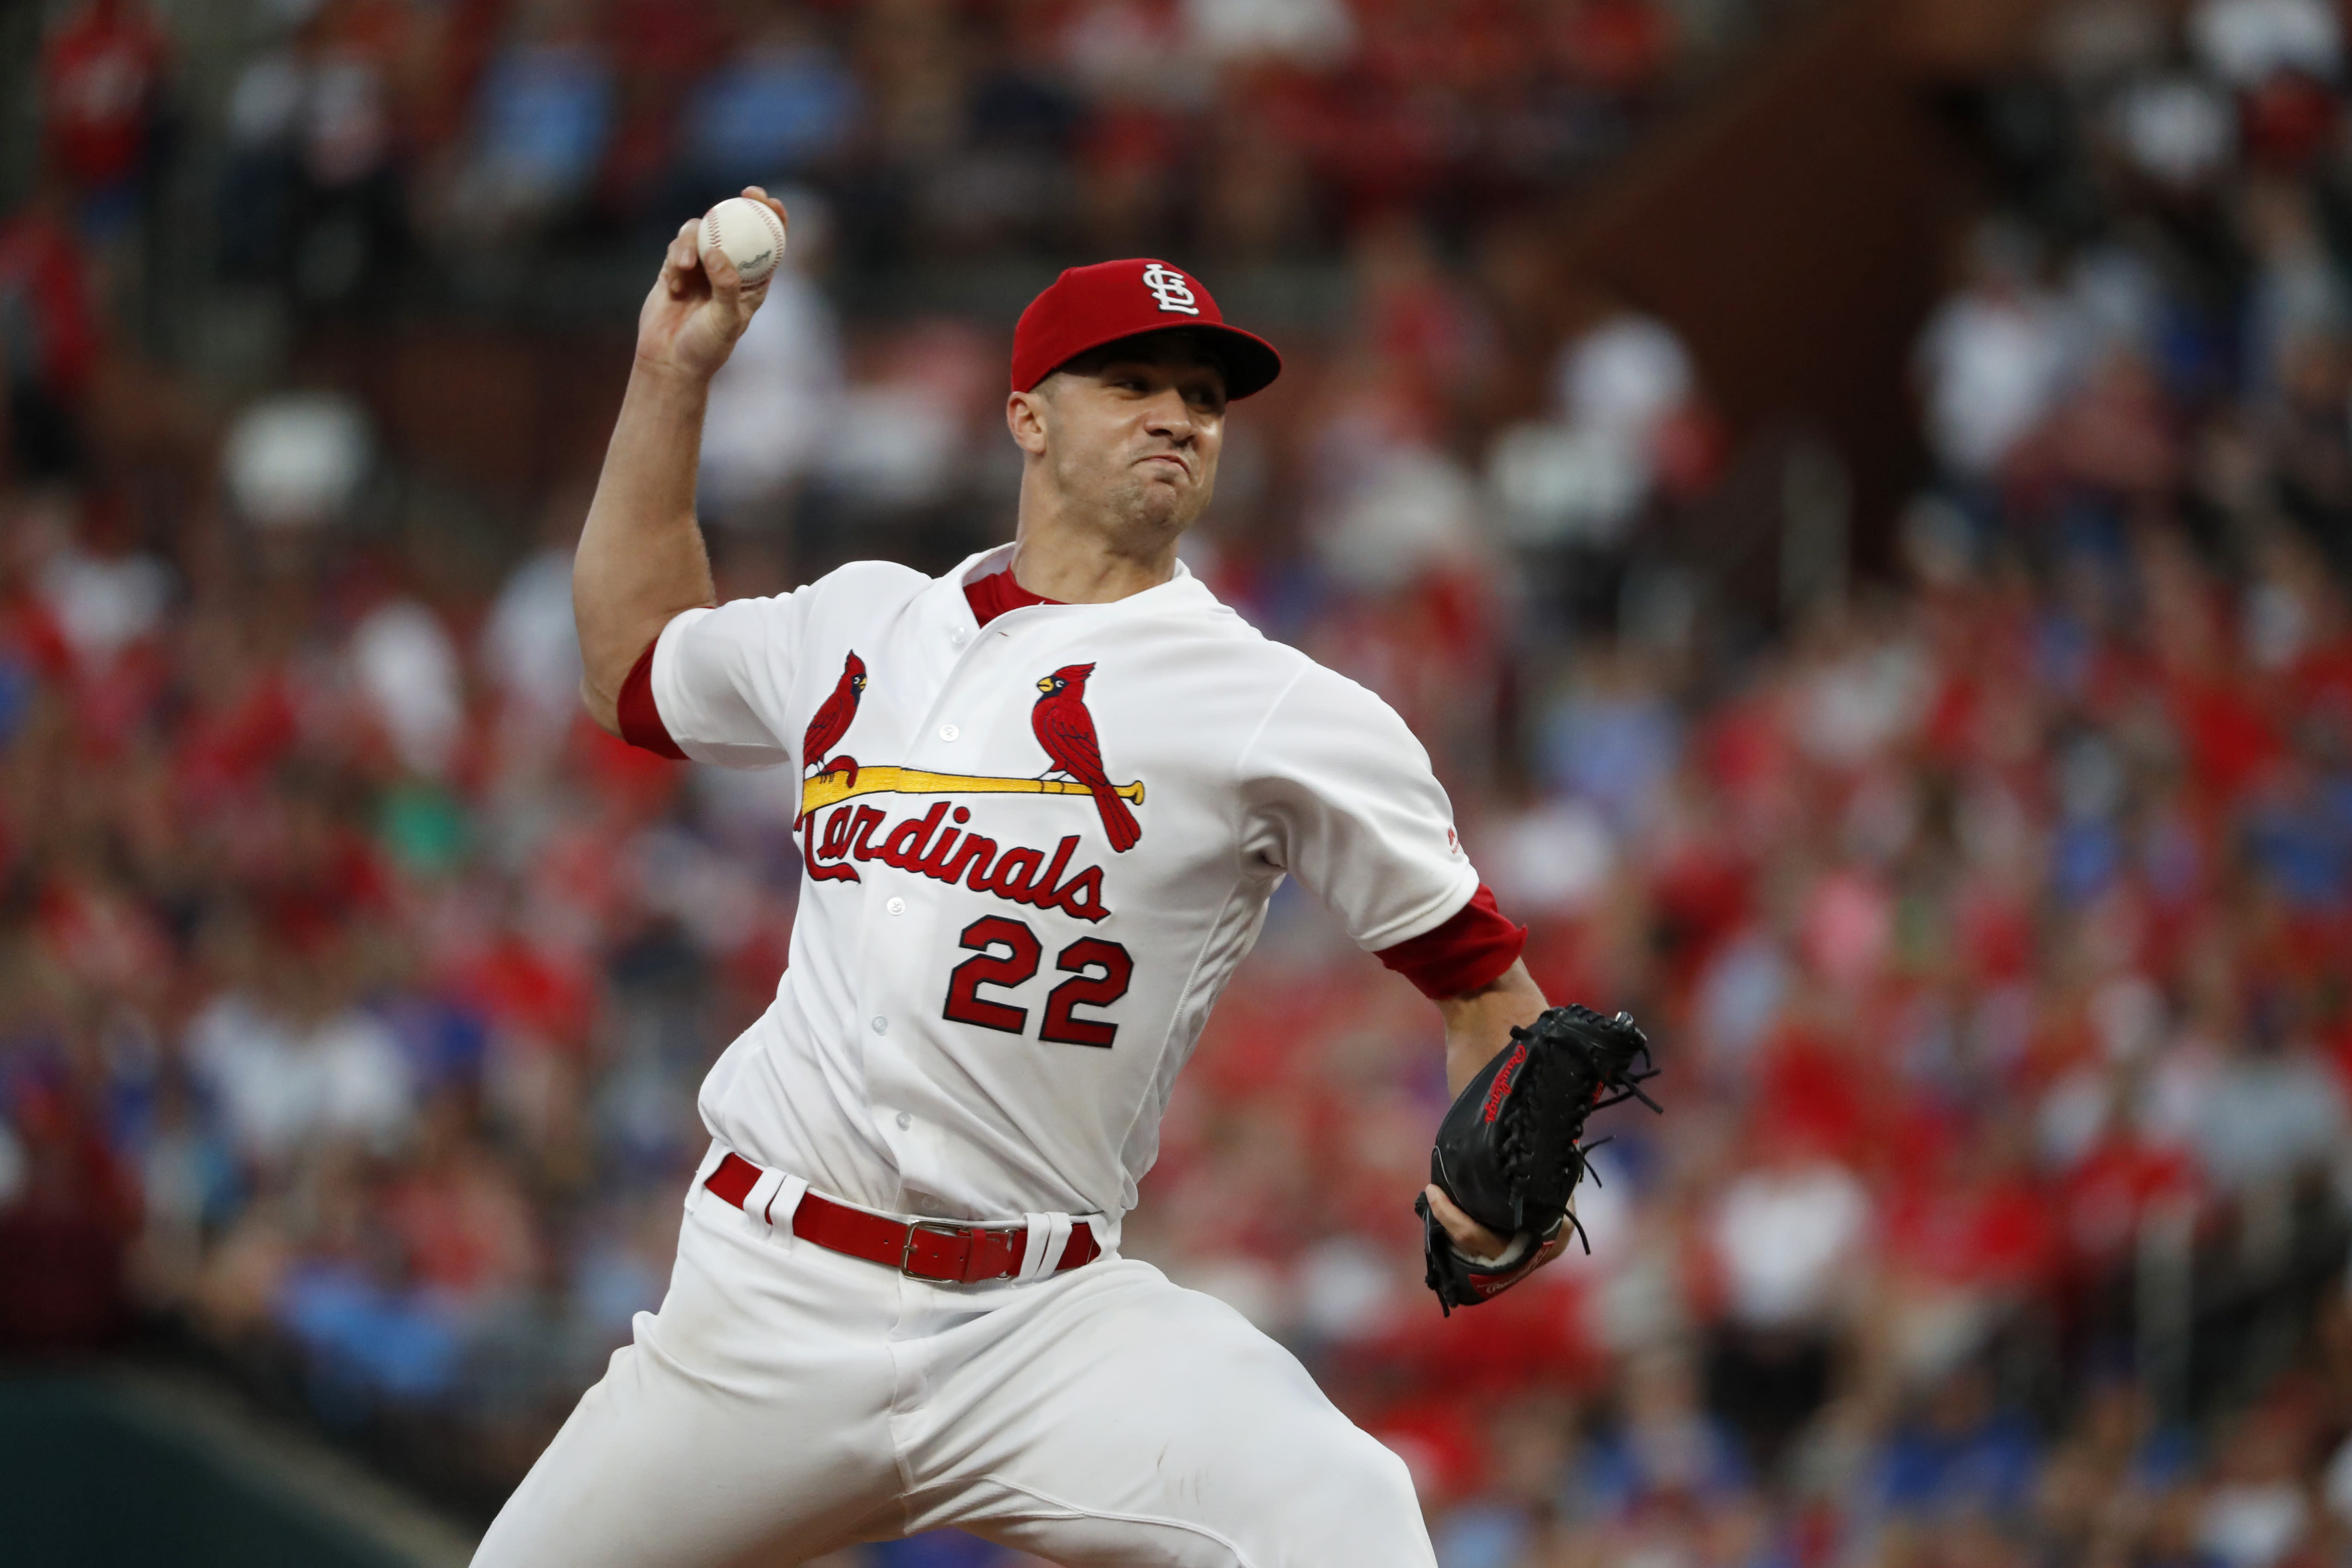 Cardinals beat Cubs 8-0, move into 1st place in NL Central